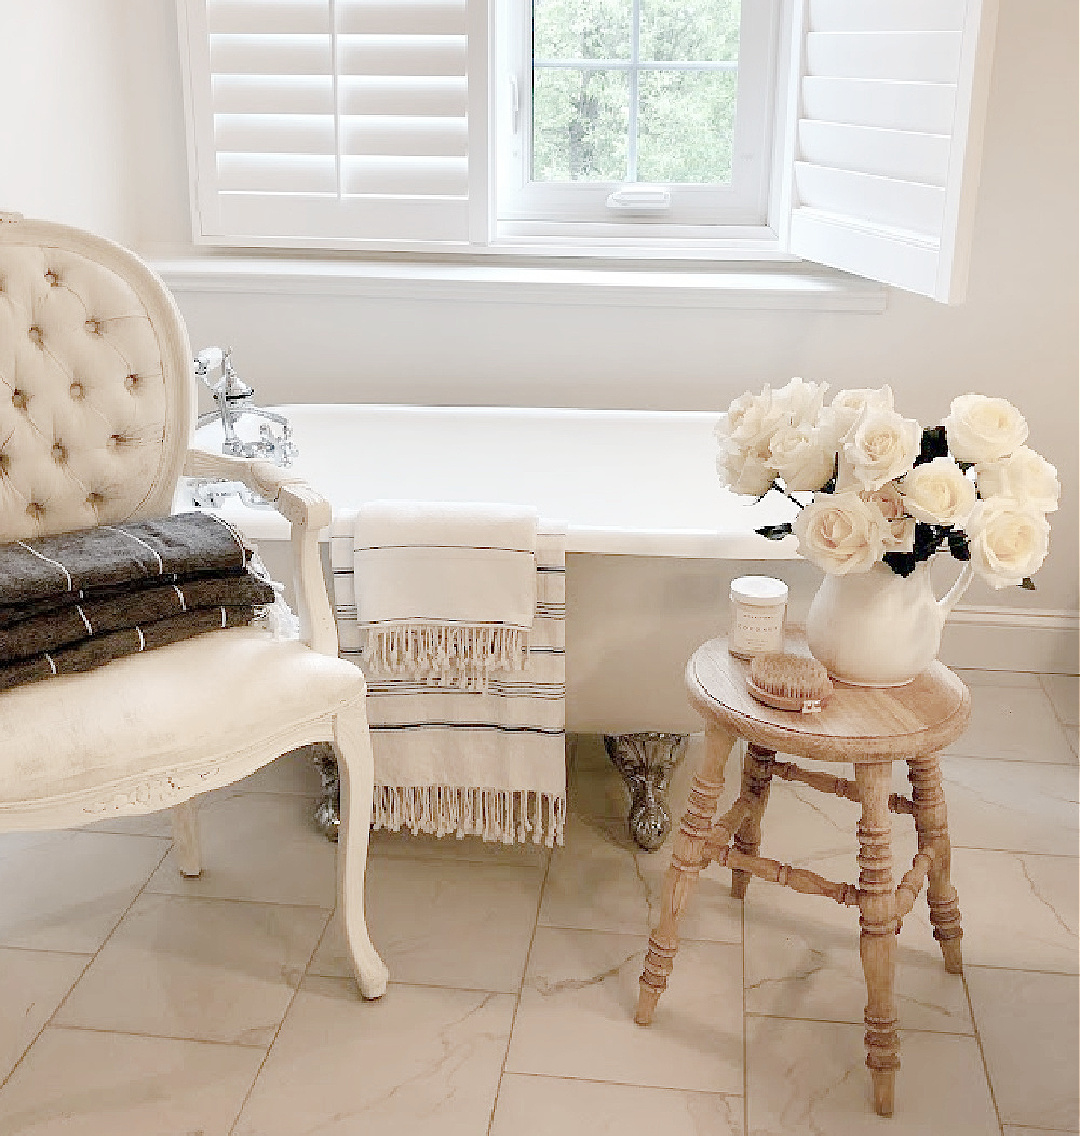 Serene white bath with vintage clawfoot tub and Louis style chair - Hello Lovely Studio. #modernfrench